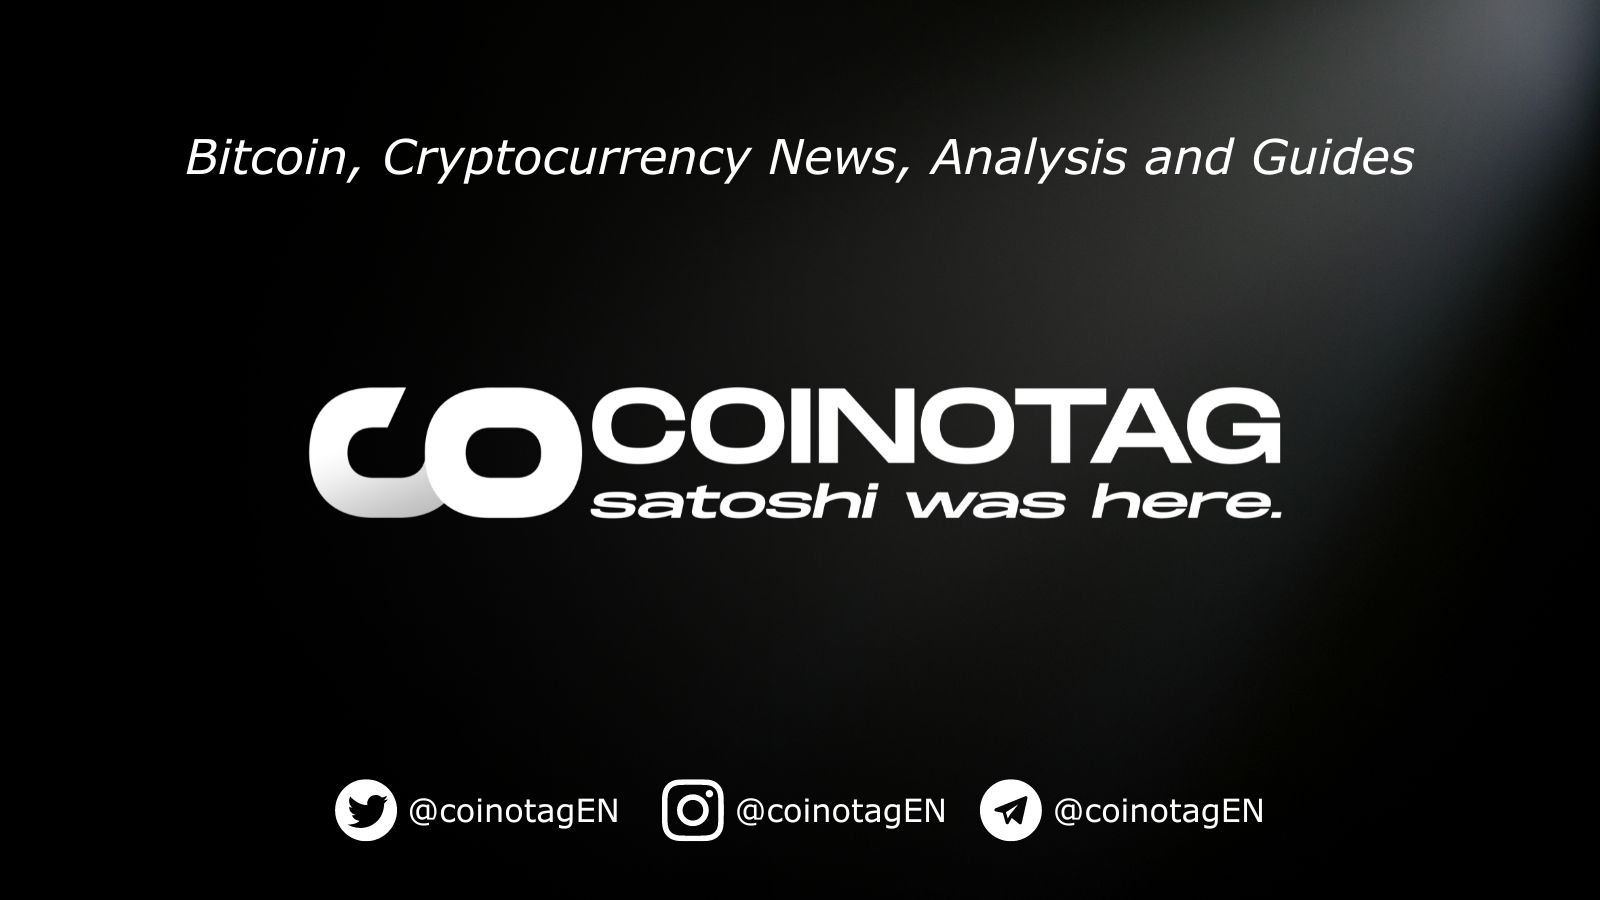 Before you reading,Don`t miss coins like PEPE again! Click here to find new PEPEs! Nigerian SEC Set To Meet With Foreign Crypto Exchanges Amid Regulatory Crackdown: Report The Nigerian Securities and Exchange Commission (SEC) is set to meet with crypto industry leaders to discuss regulatory ... Read the full article for FREE at COINOTAG!